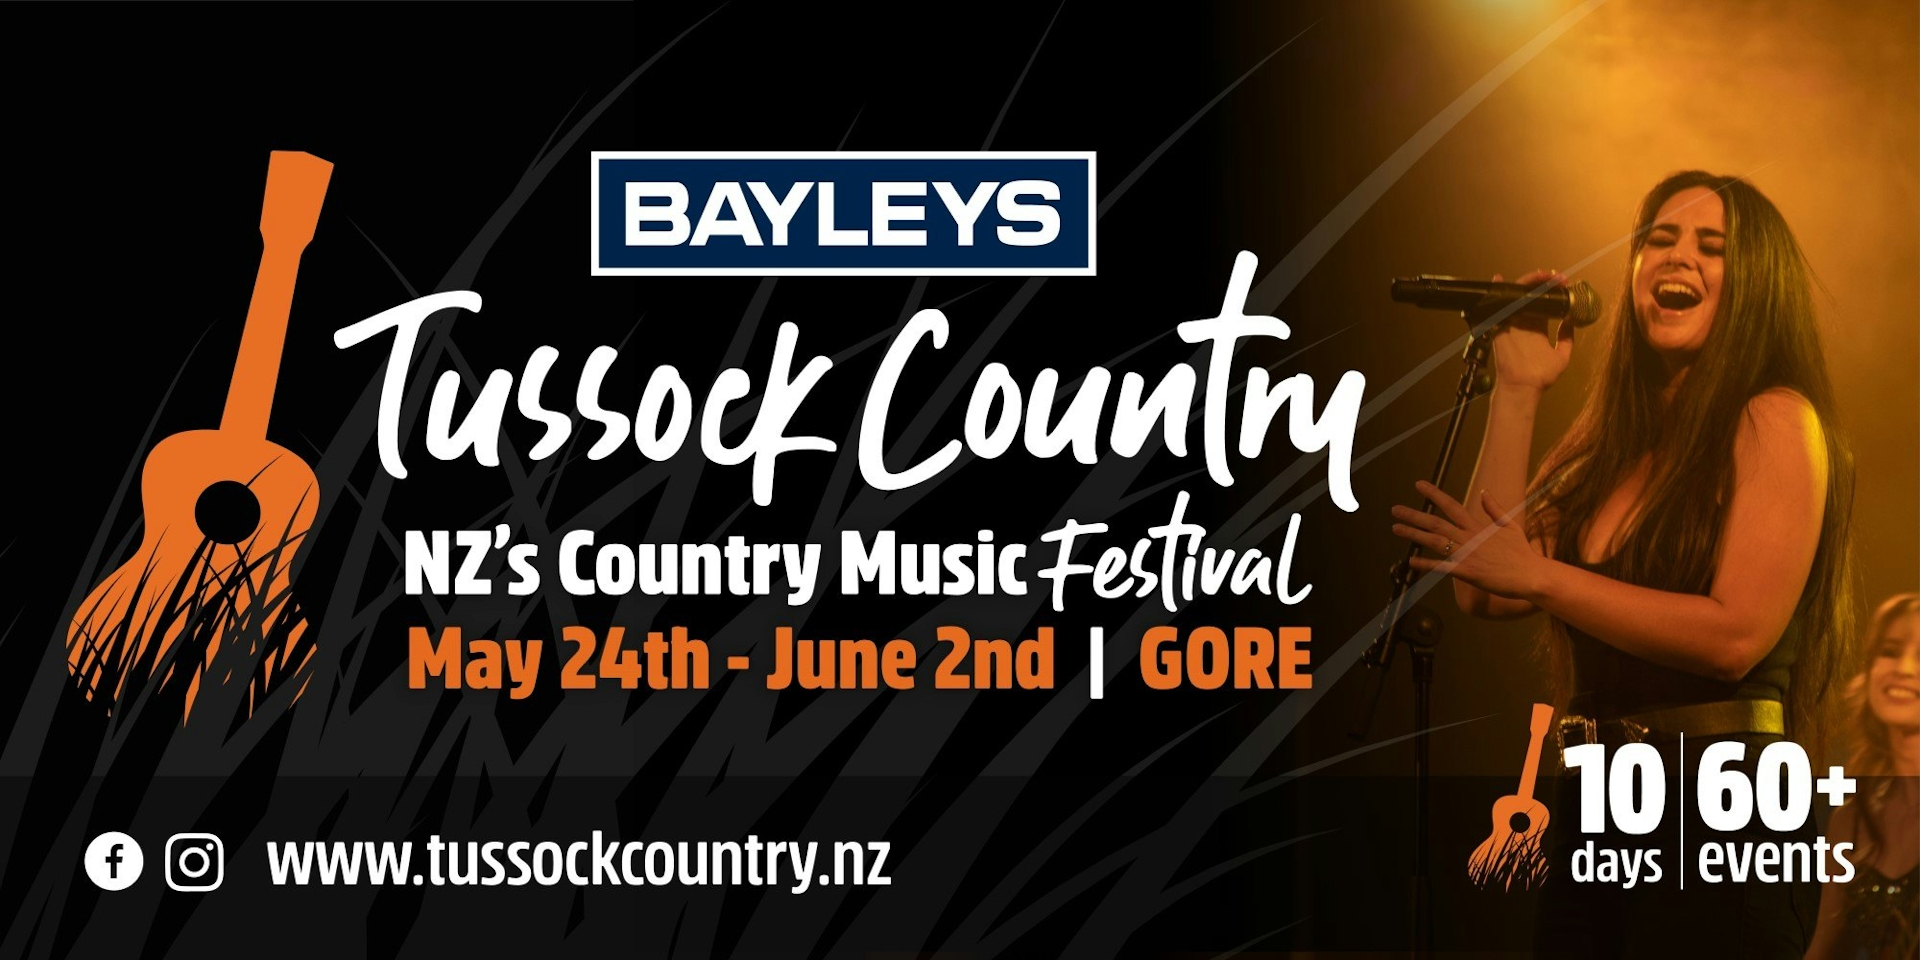 Bayleys Tussock Country Music Festival